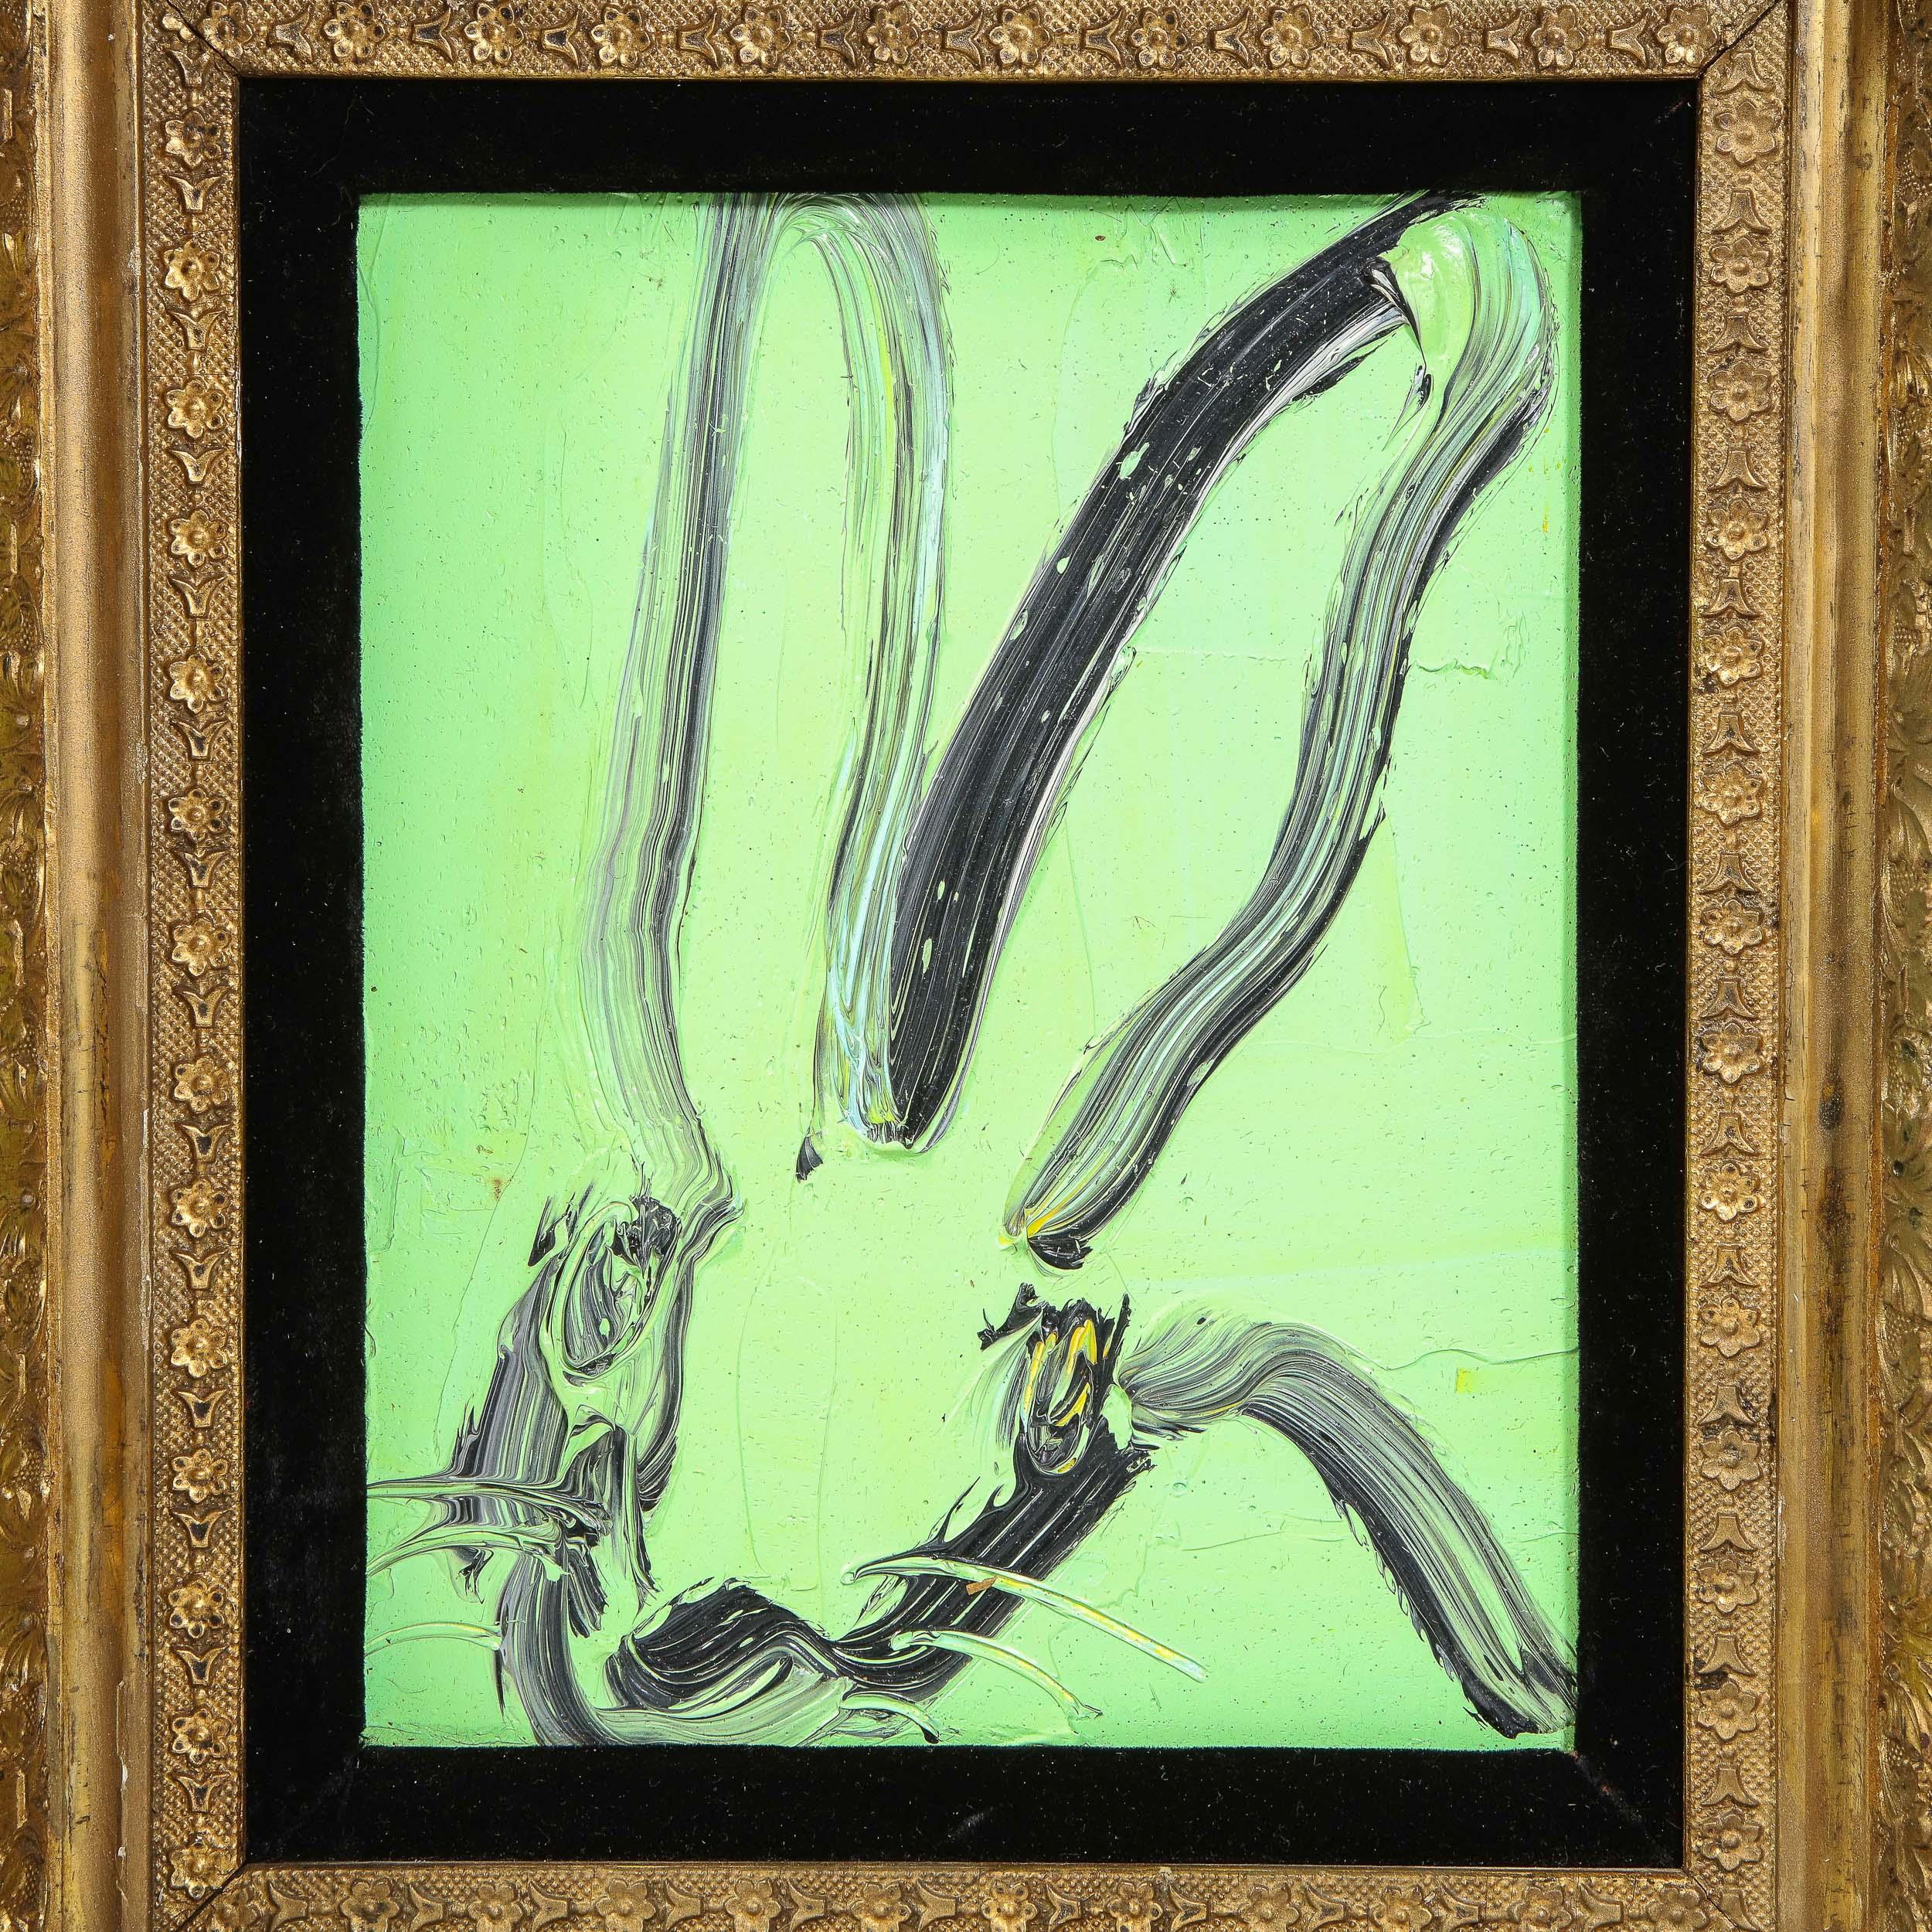 This whimsical and sophisticated painting was realized by the esteemed contemporary painter, Hunt Slonem in 2014. It presents a stylized bunny rabbit, rendered with loose and expressive brush strokes in black paint against a chartreuse background.